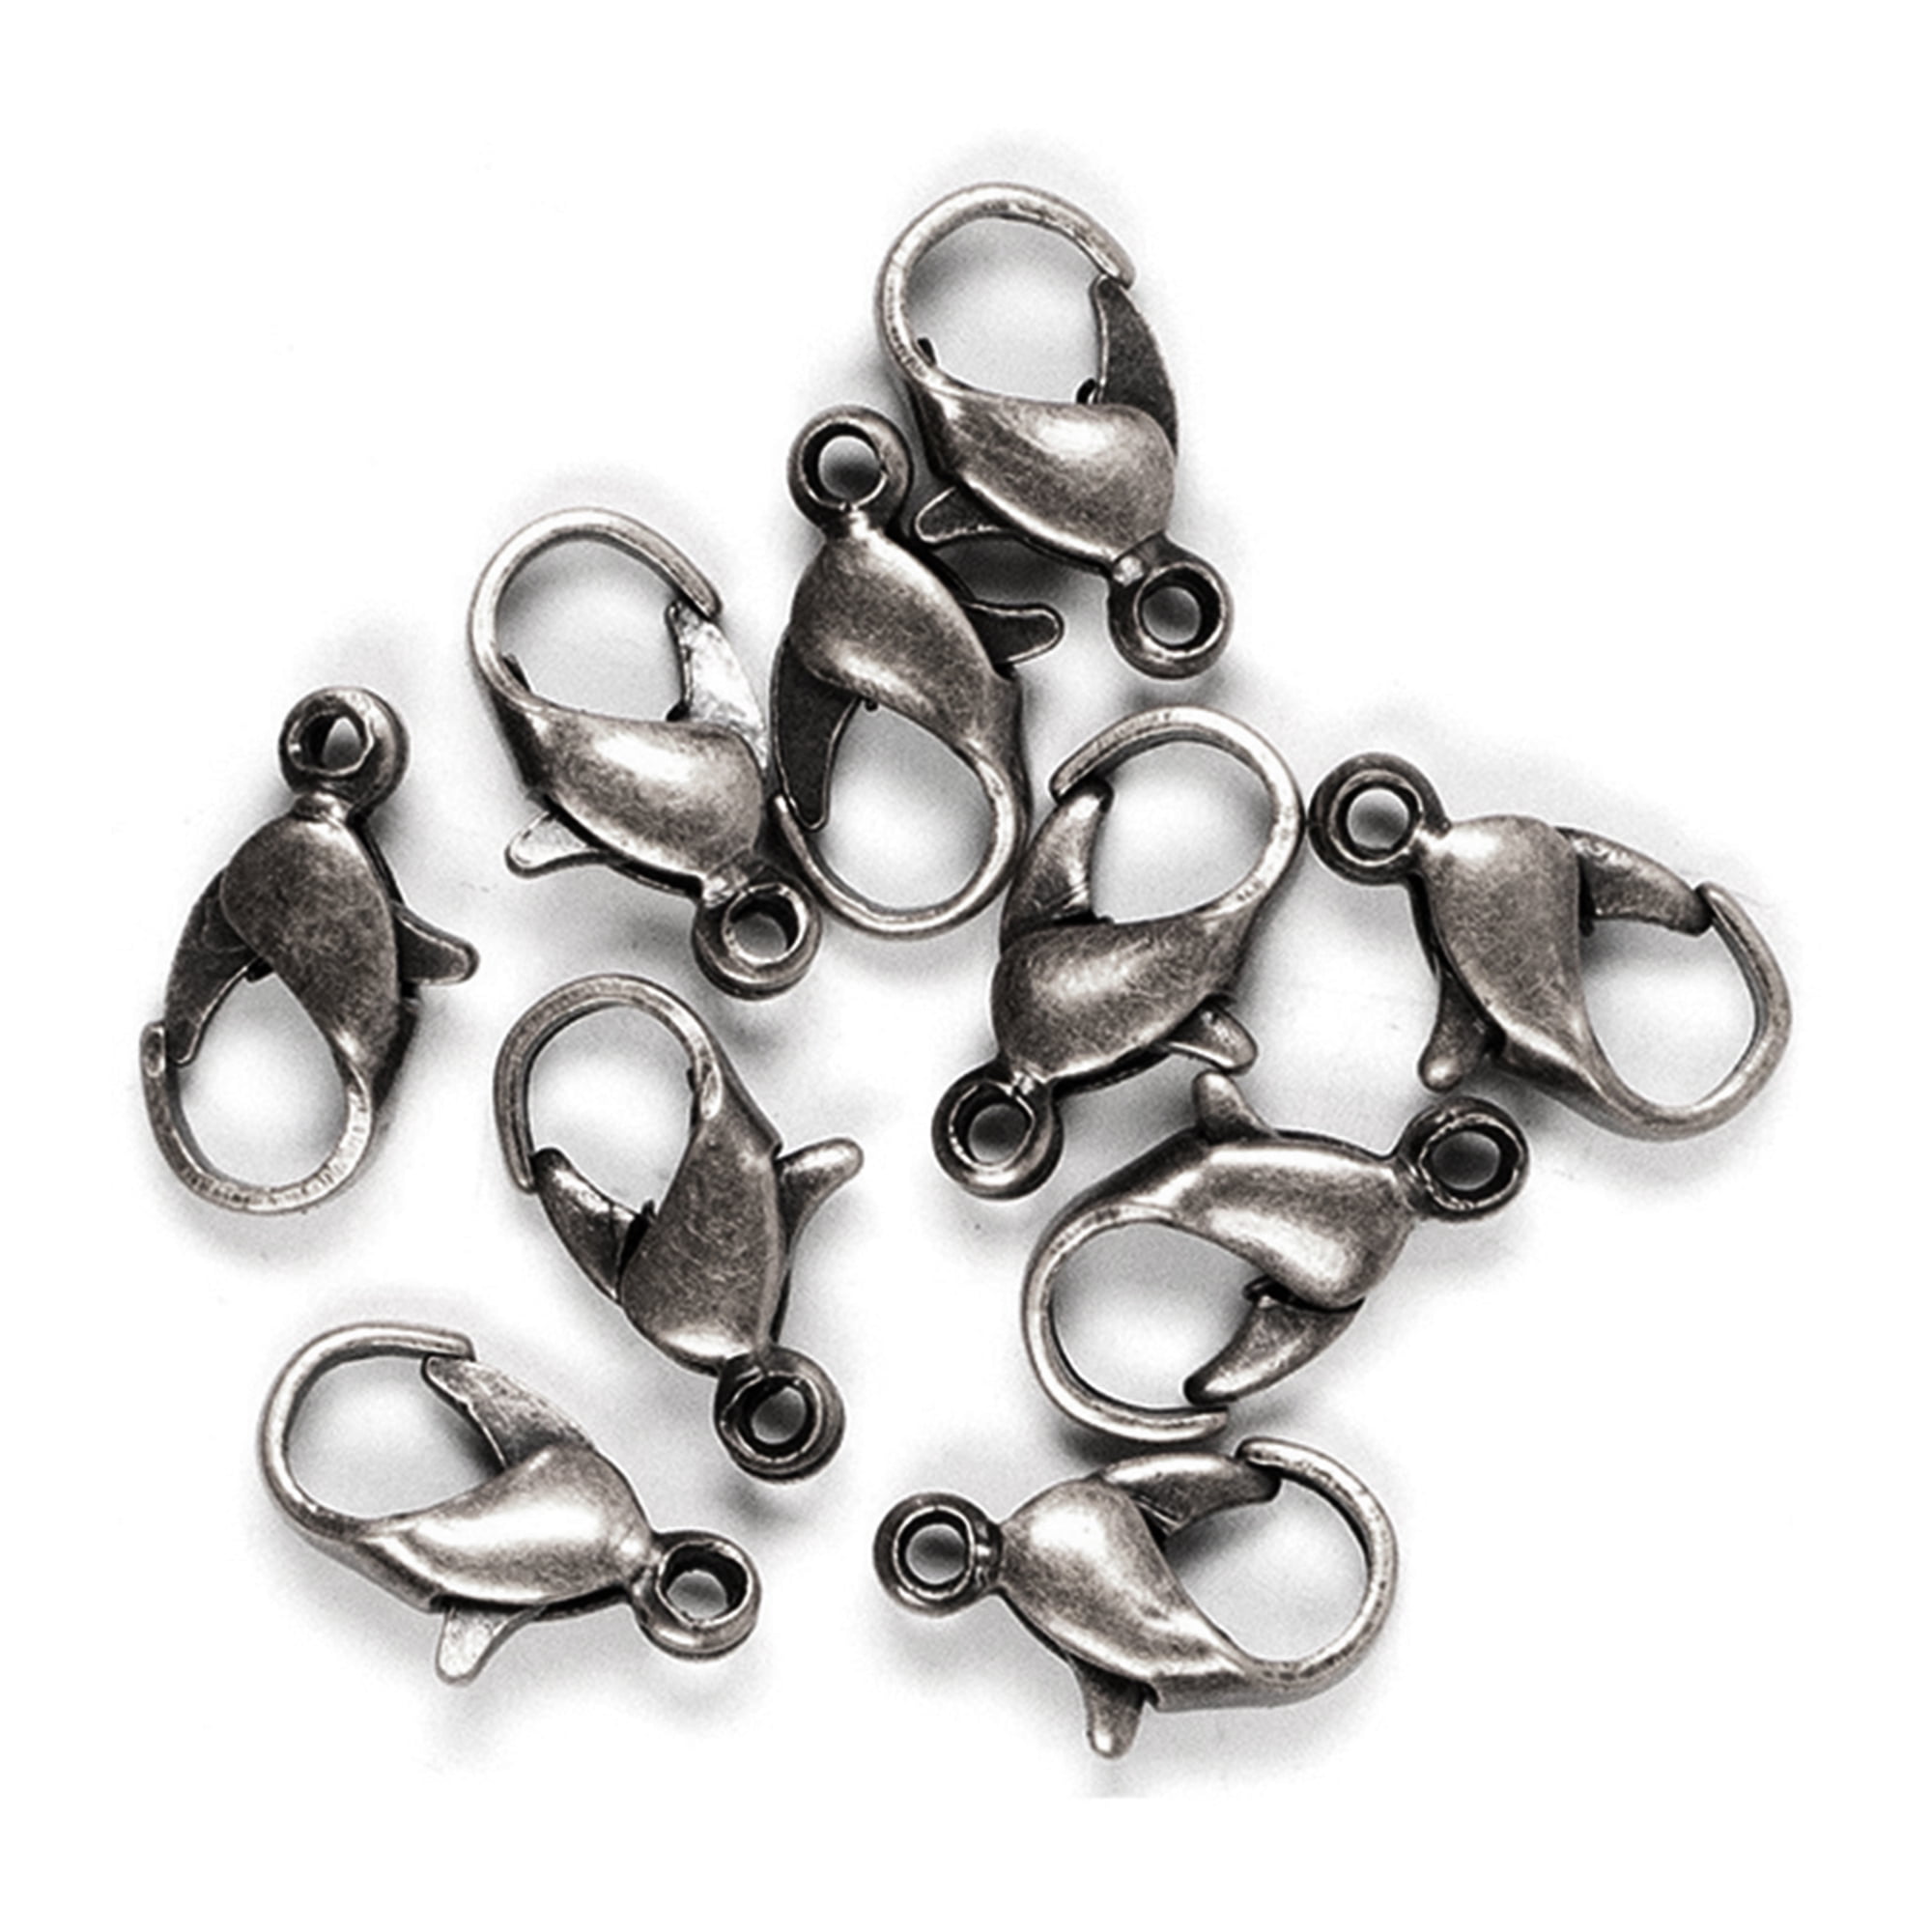 Stainless Steel Lobster Claw Clasp appx 15mm appx 20 Total Pieces